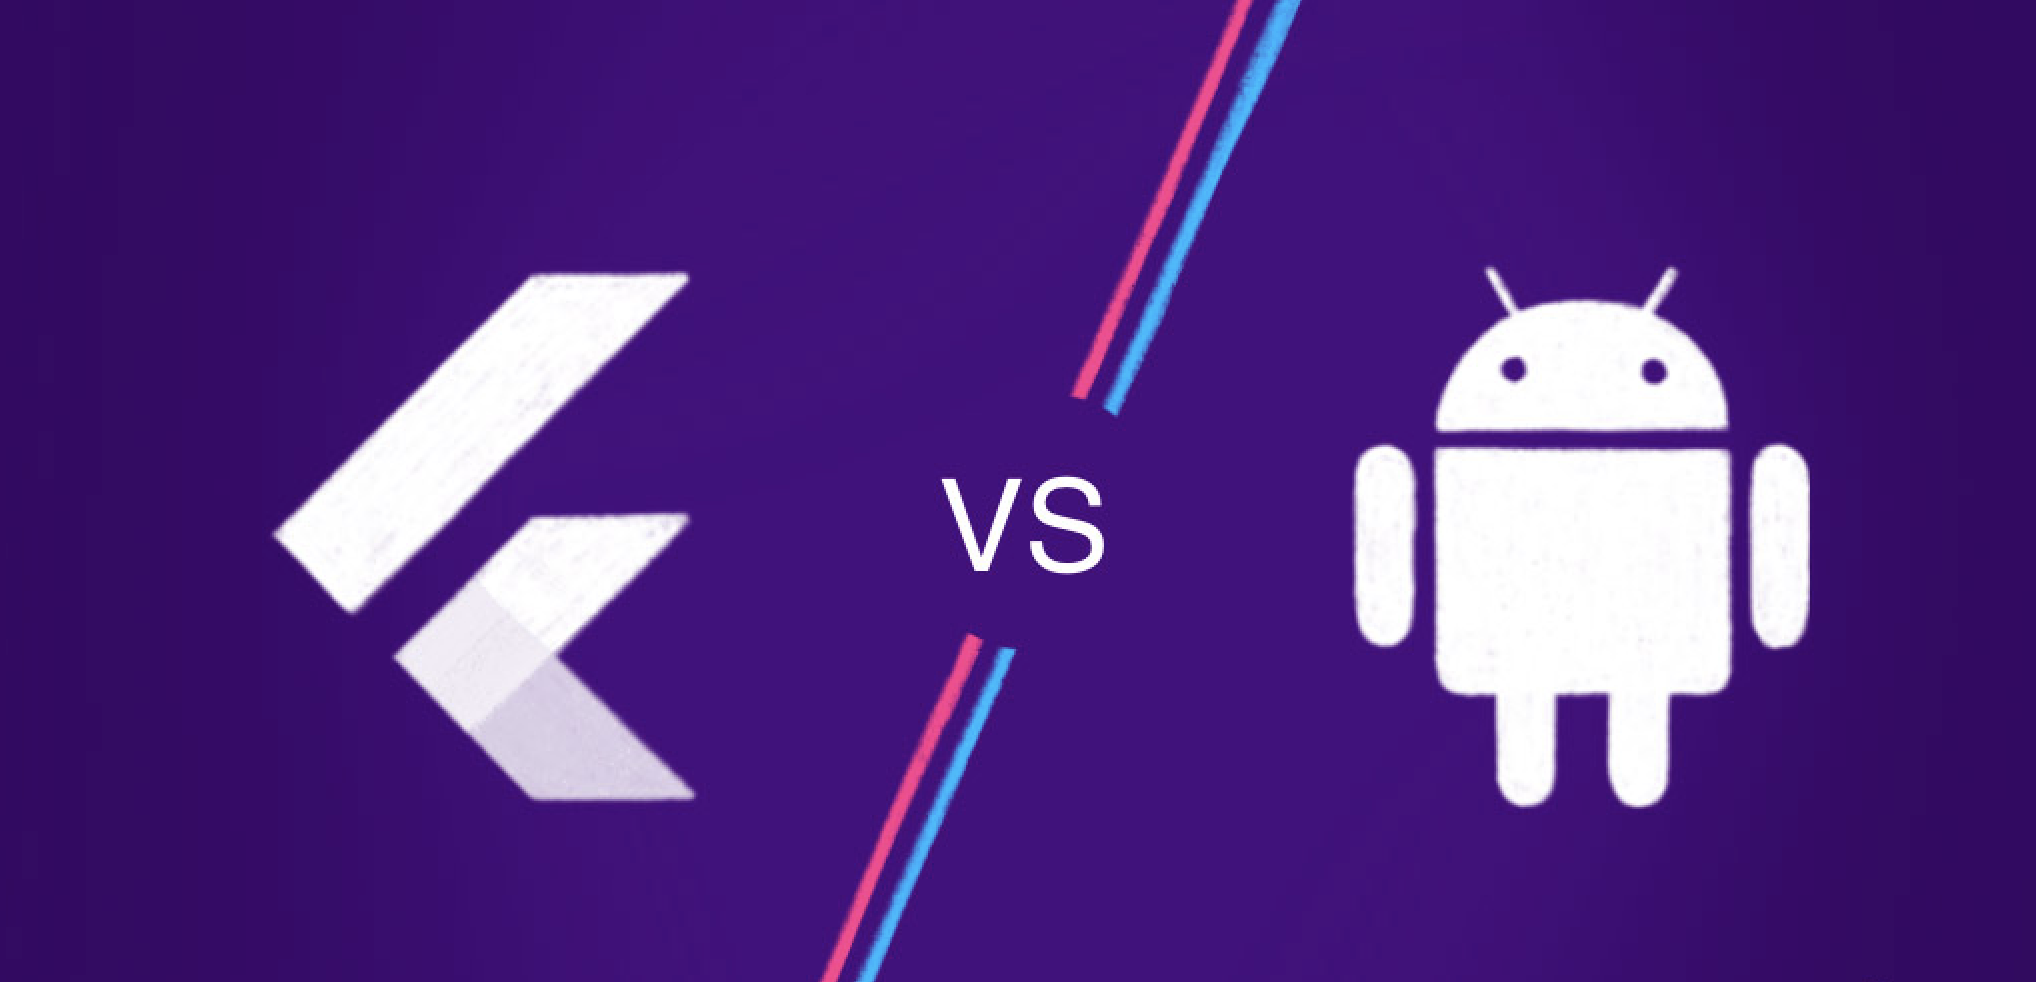 Flutter vs Android Studio: Which is Better? - Broodle